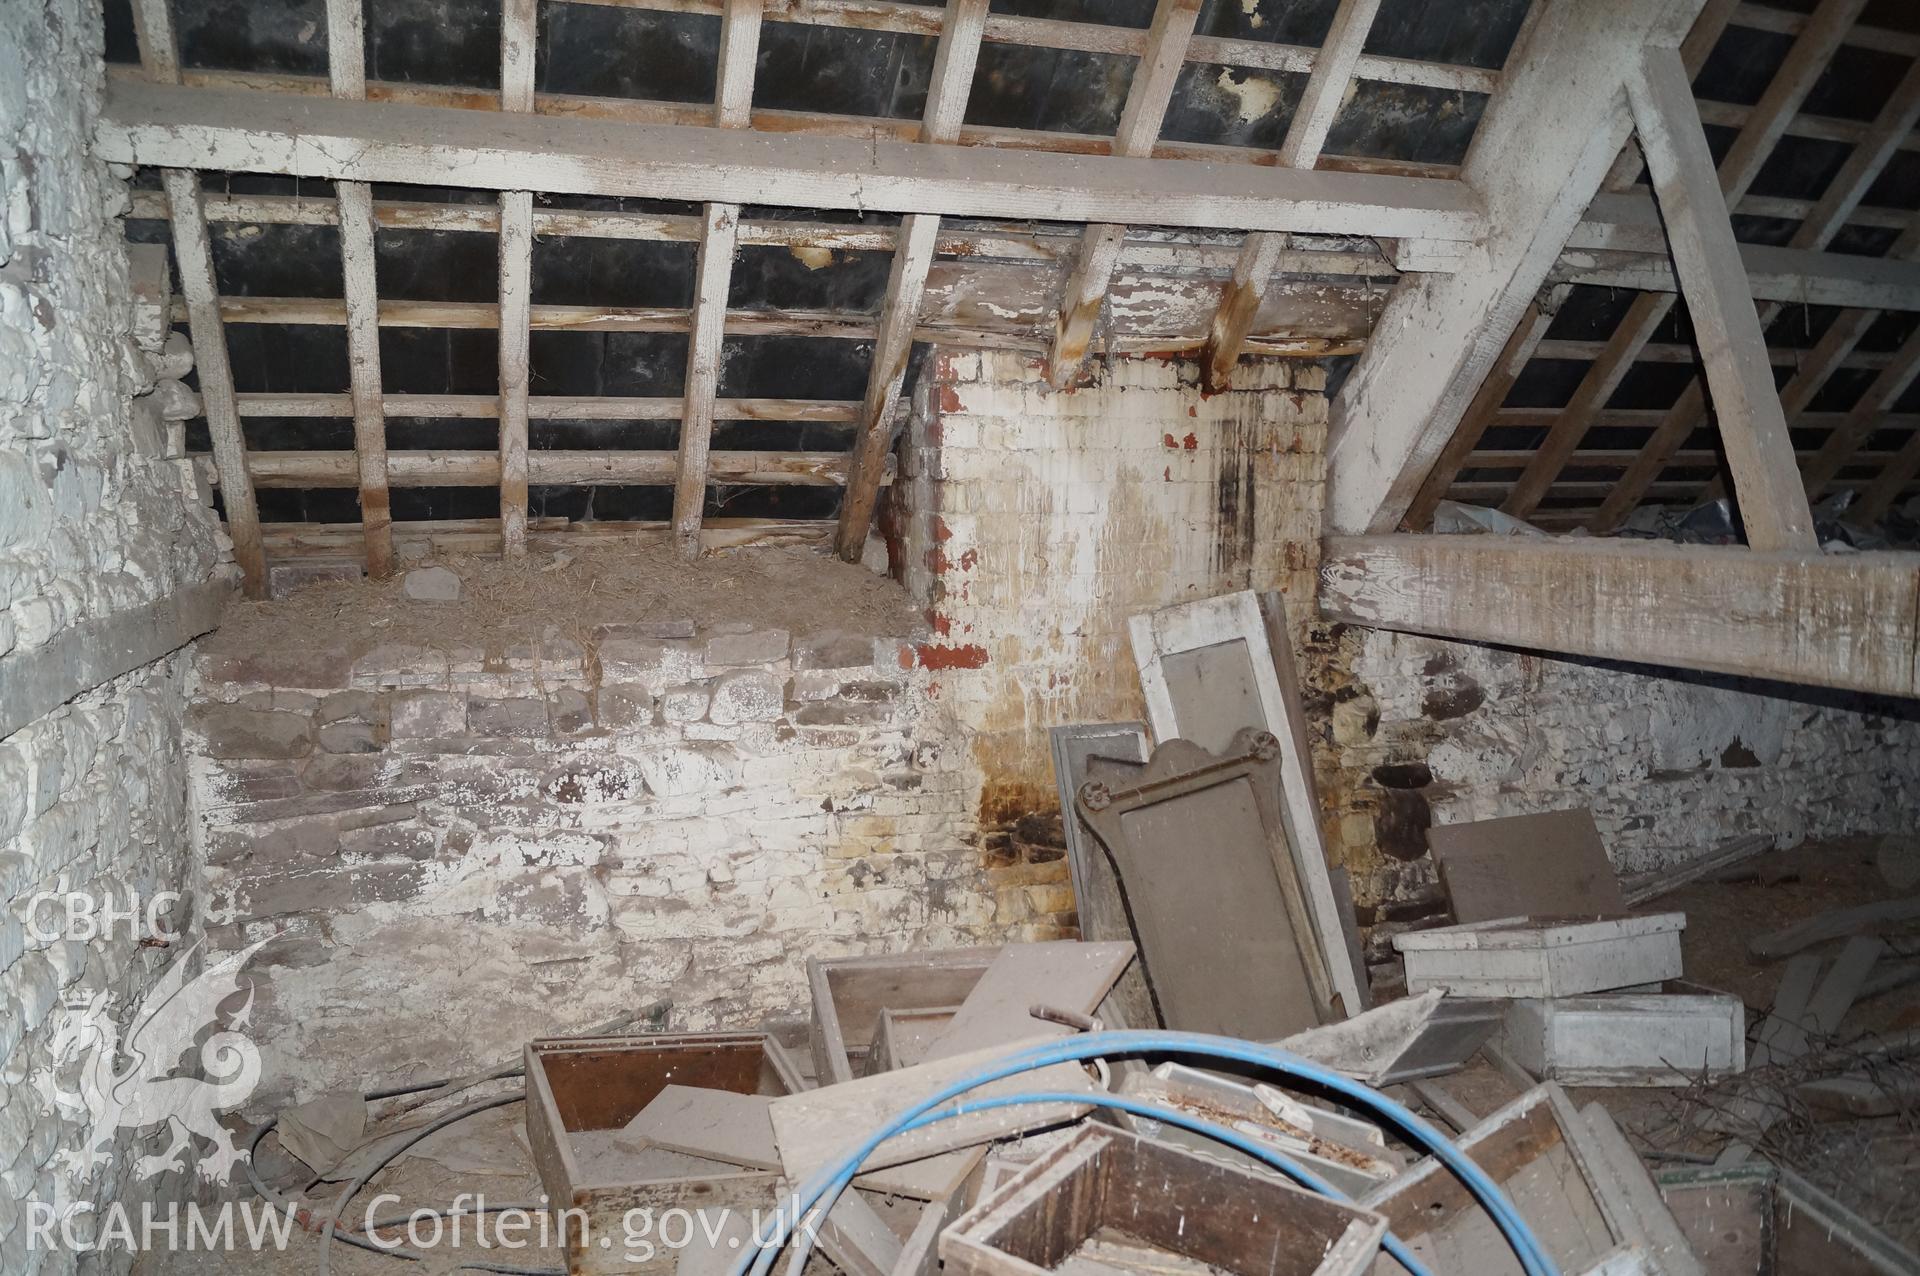 Internal view 'looking northwest at the stable loft showing the brick chimney from the boiler in the brick lean-to kitchen below' on Gwrlodau Farm, Llanbedr, Crickhowell. Photograph and description by Jenny Hall and Paul Sambrook of Trysor, 9th February 2018.